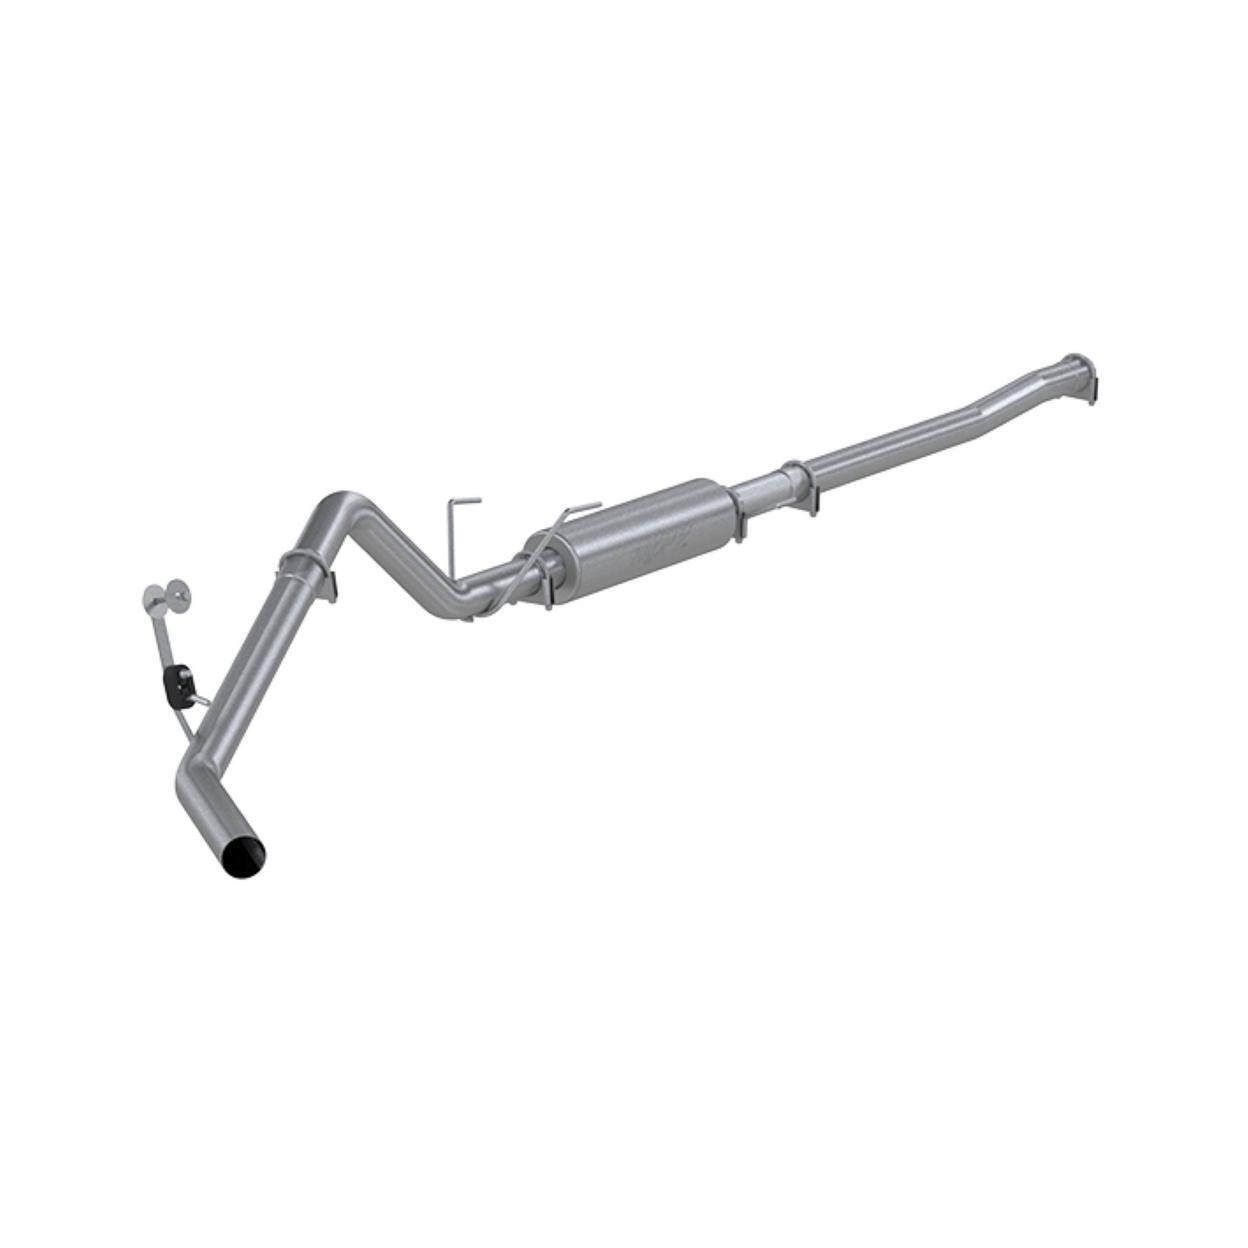 MBRP Exhaust System Kit for 2010 Dodge Ram 2500